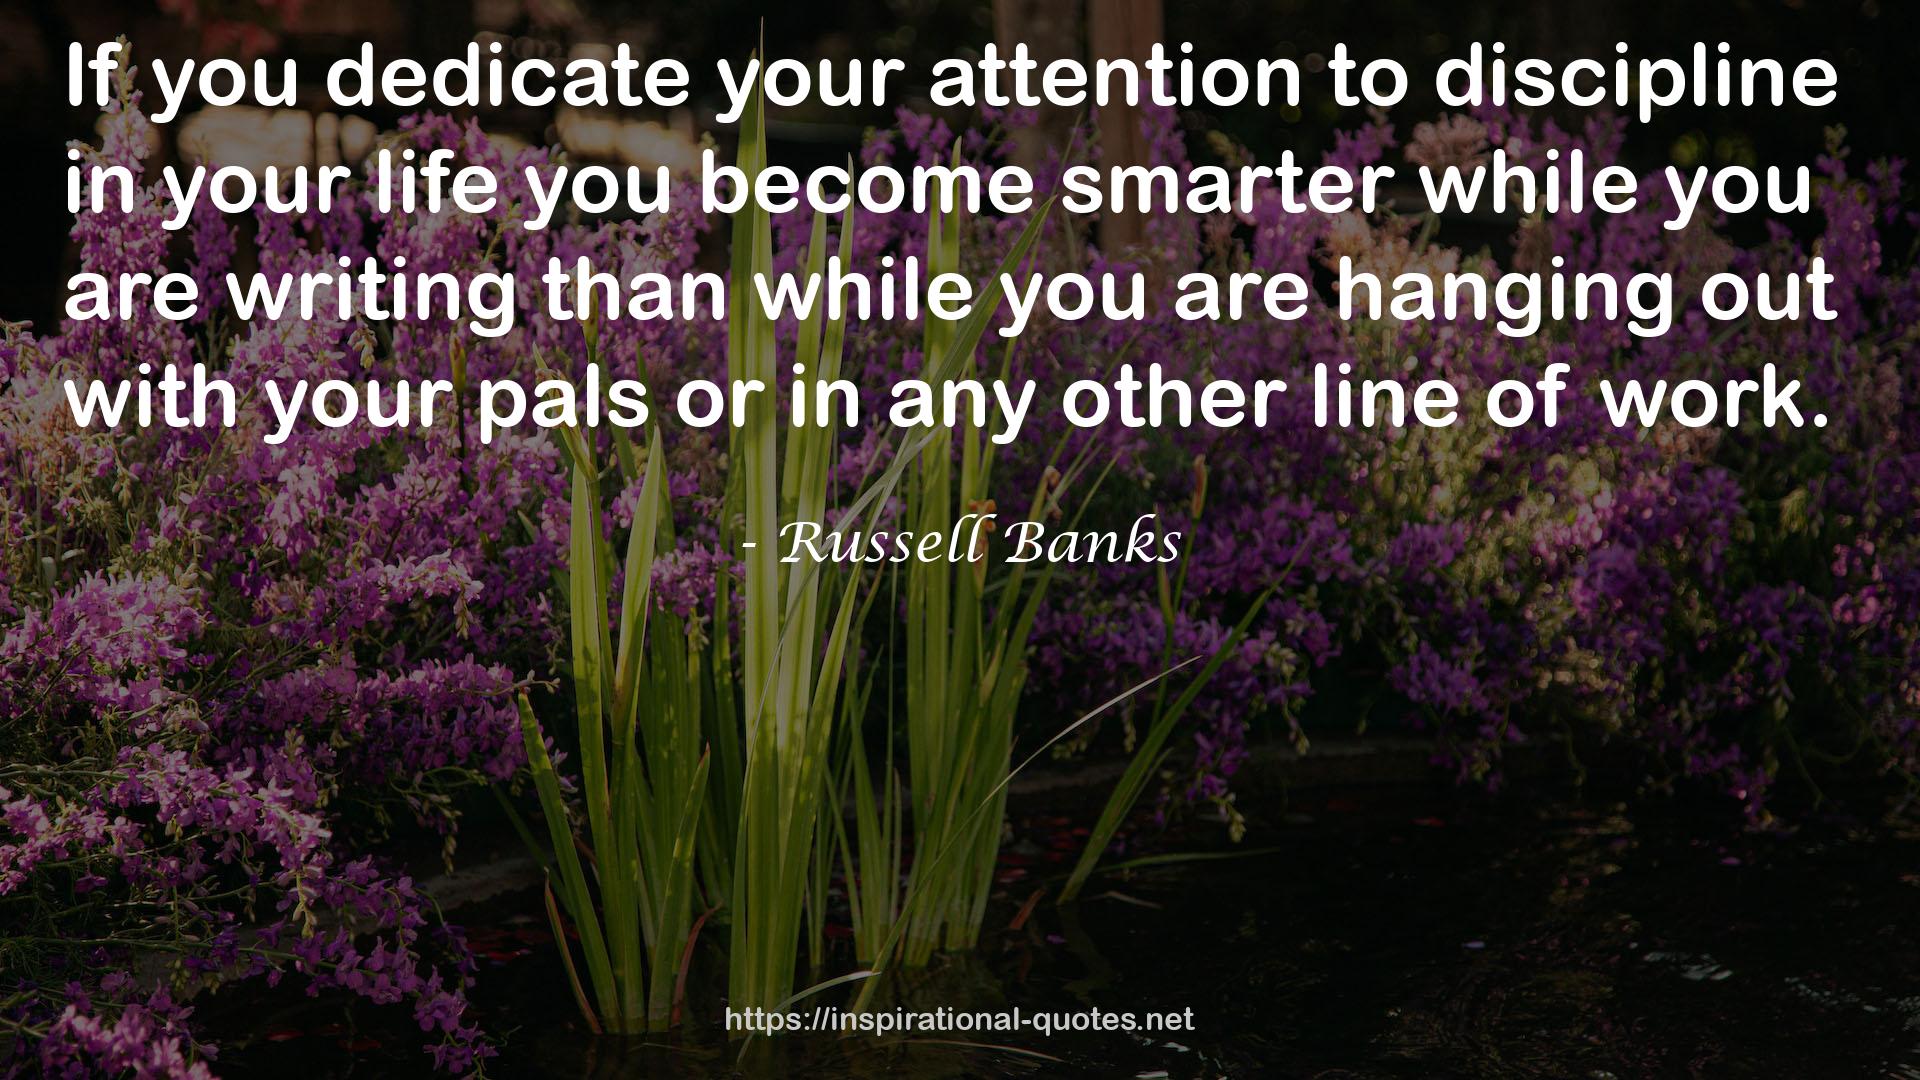 Russell Banks QUOTES